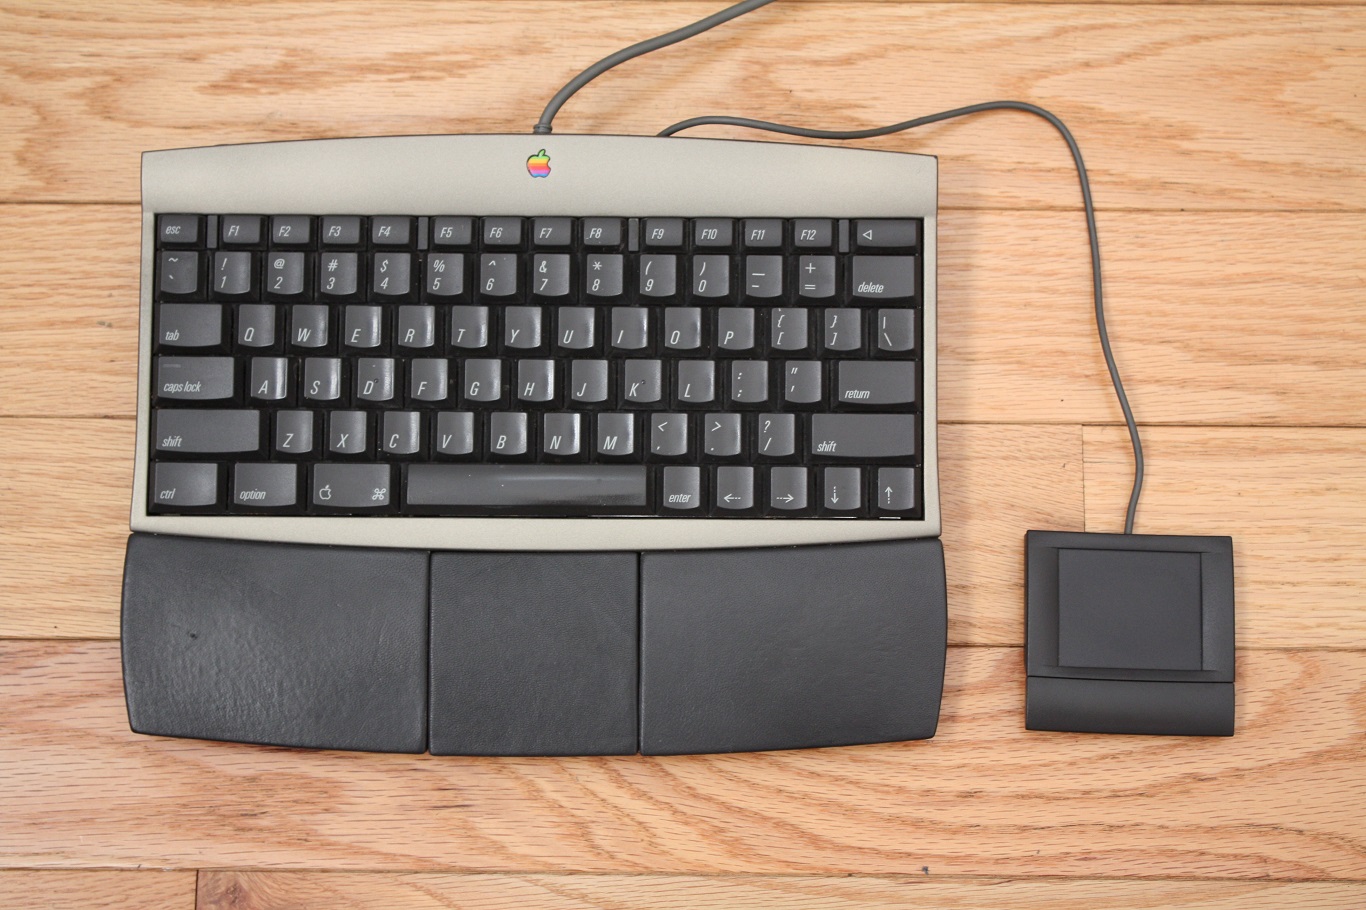 TAM - keyboard and trackpad separated